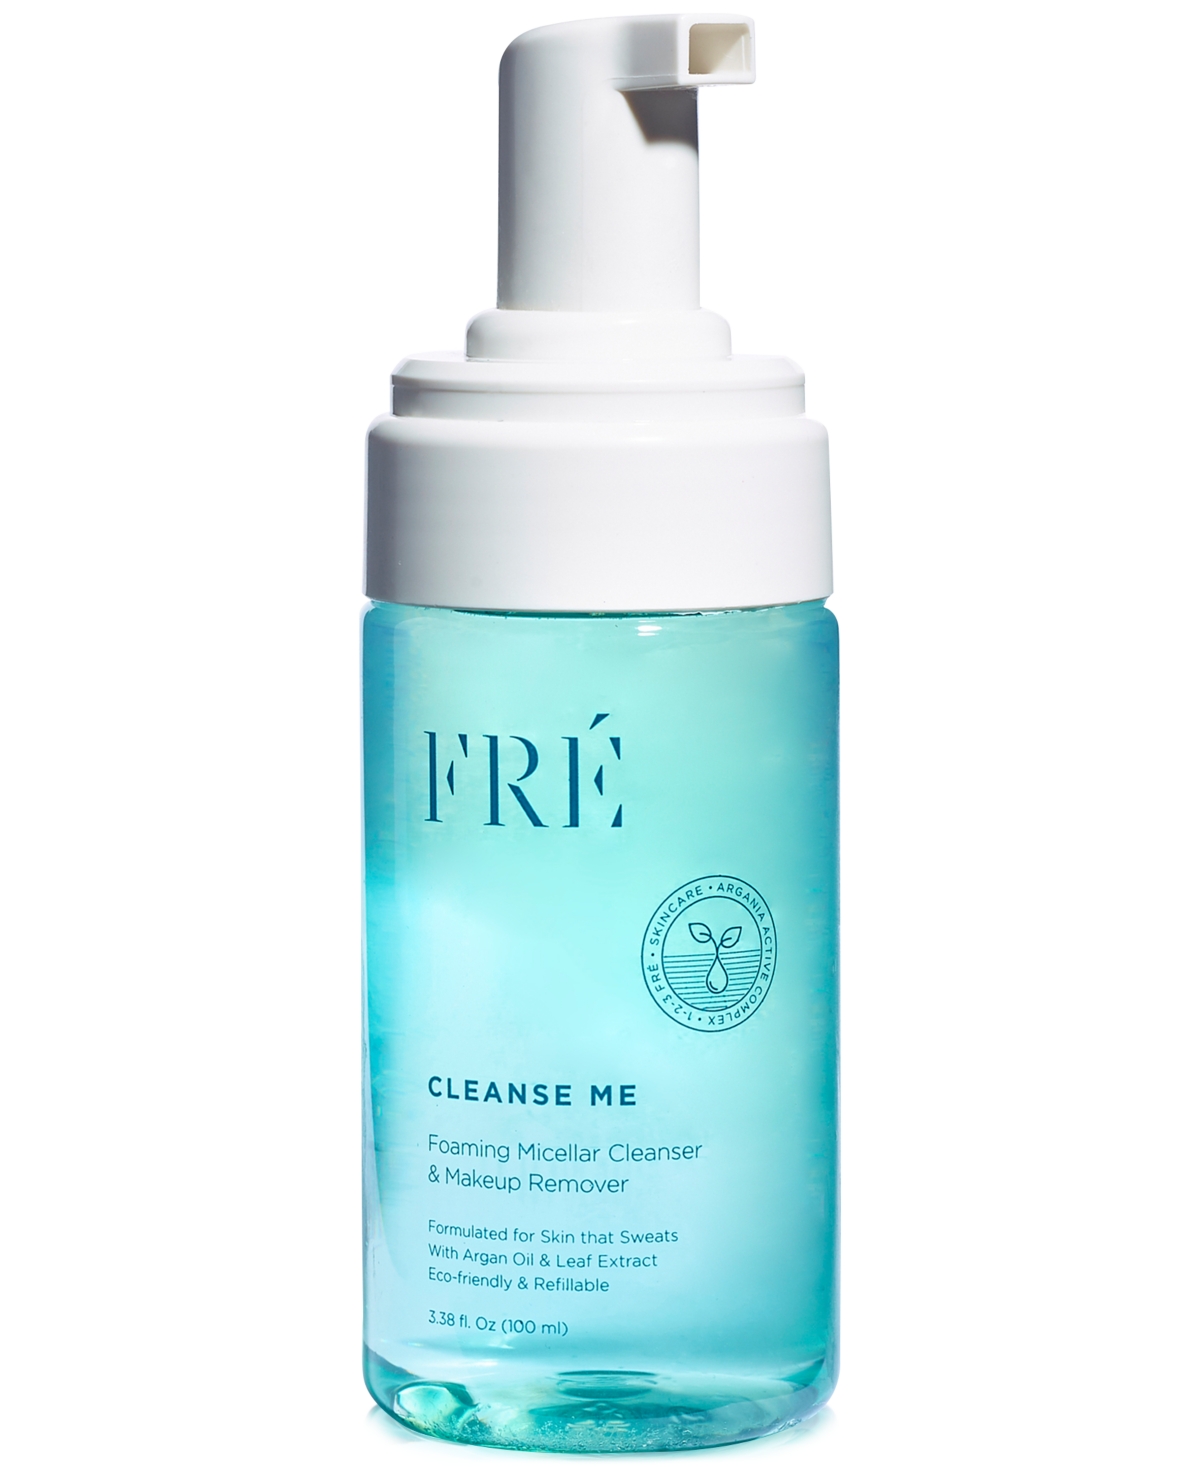 Fre Cleanse Me Foaming Micellar Cleanser, 3.38oz. In No Color